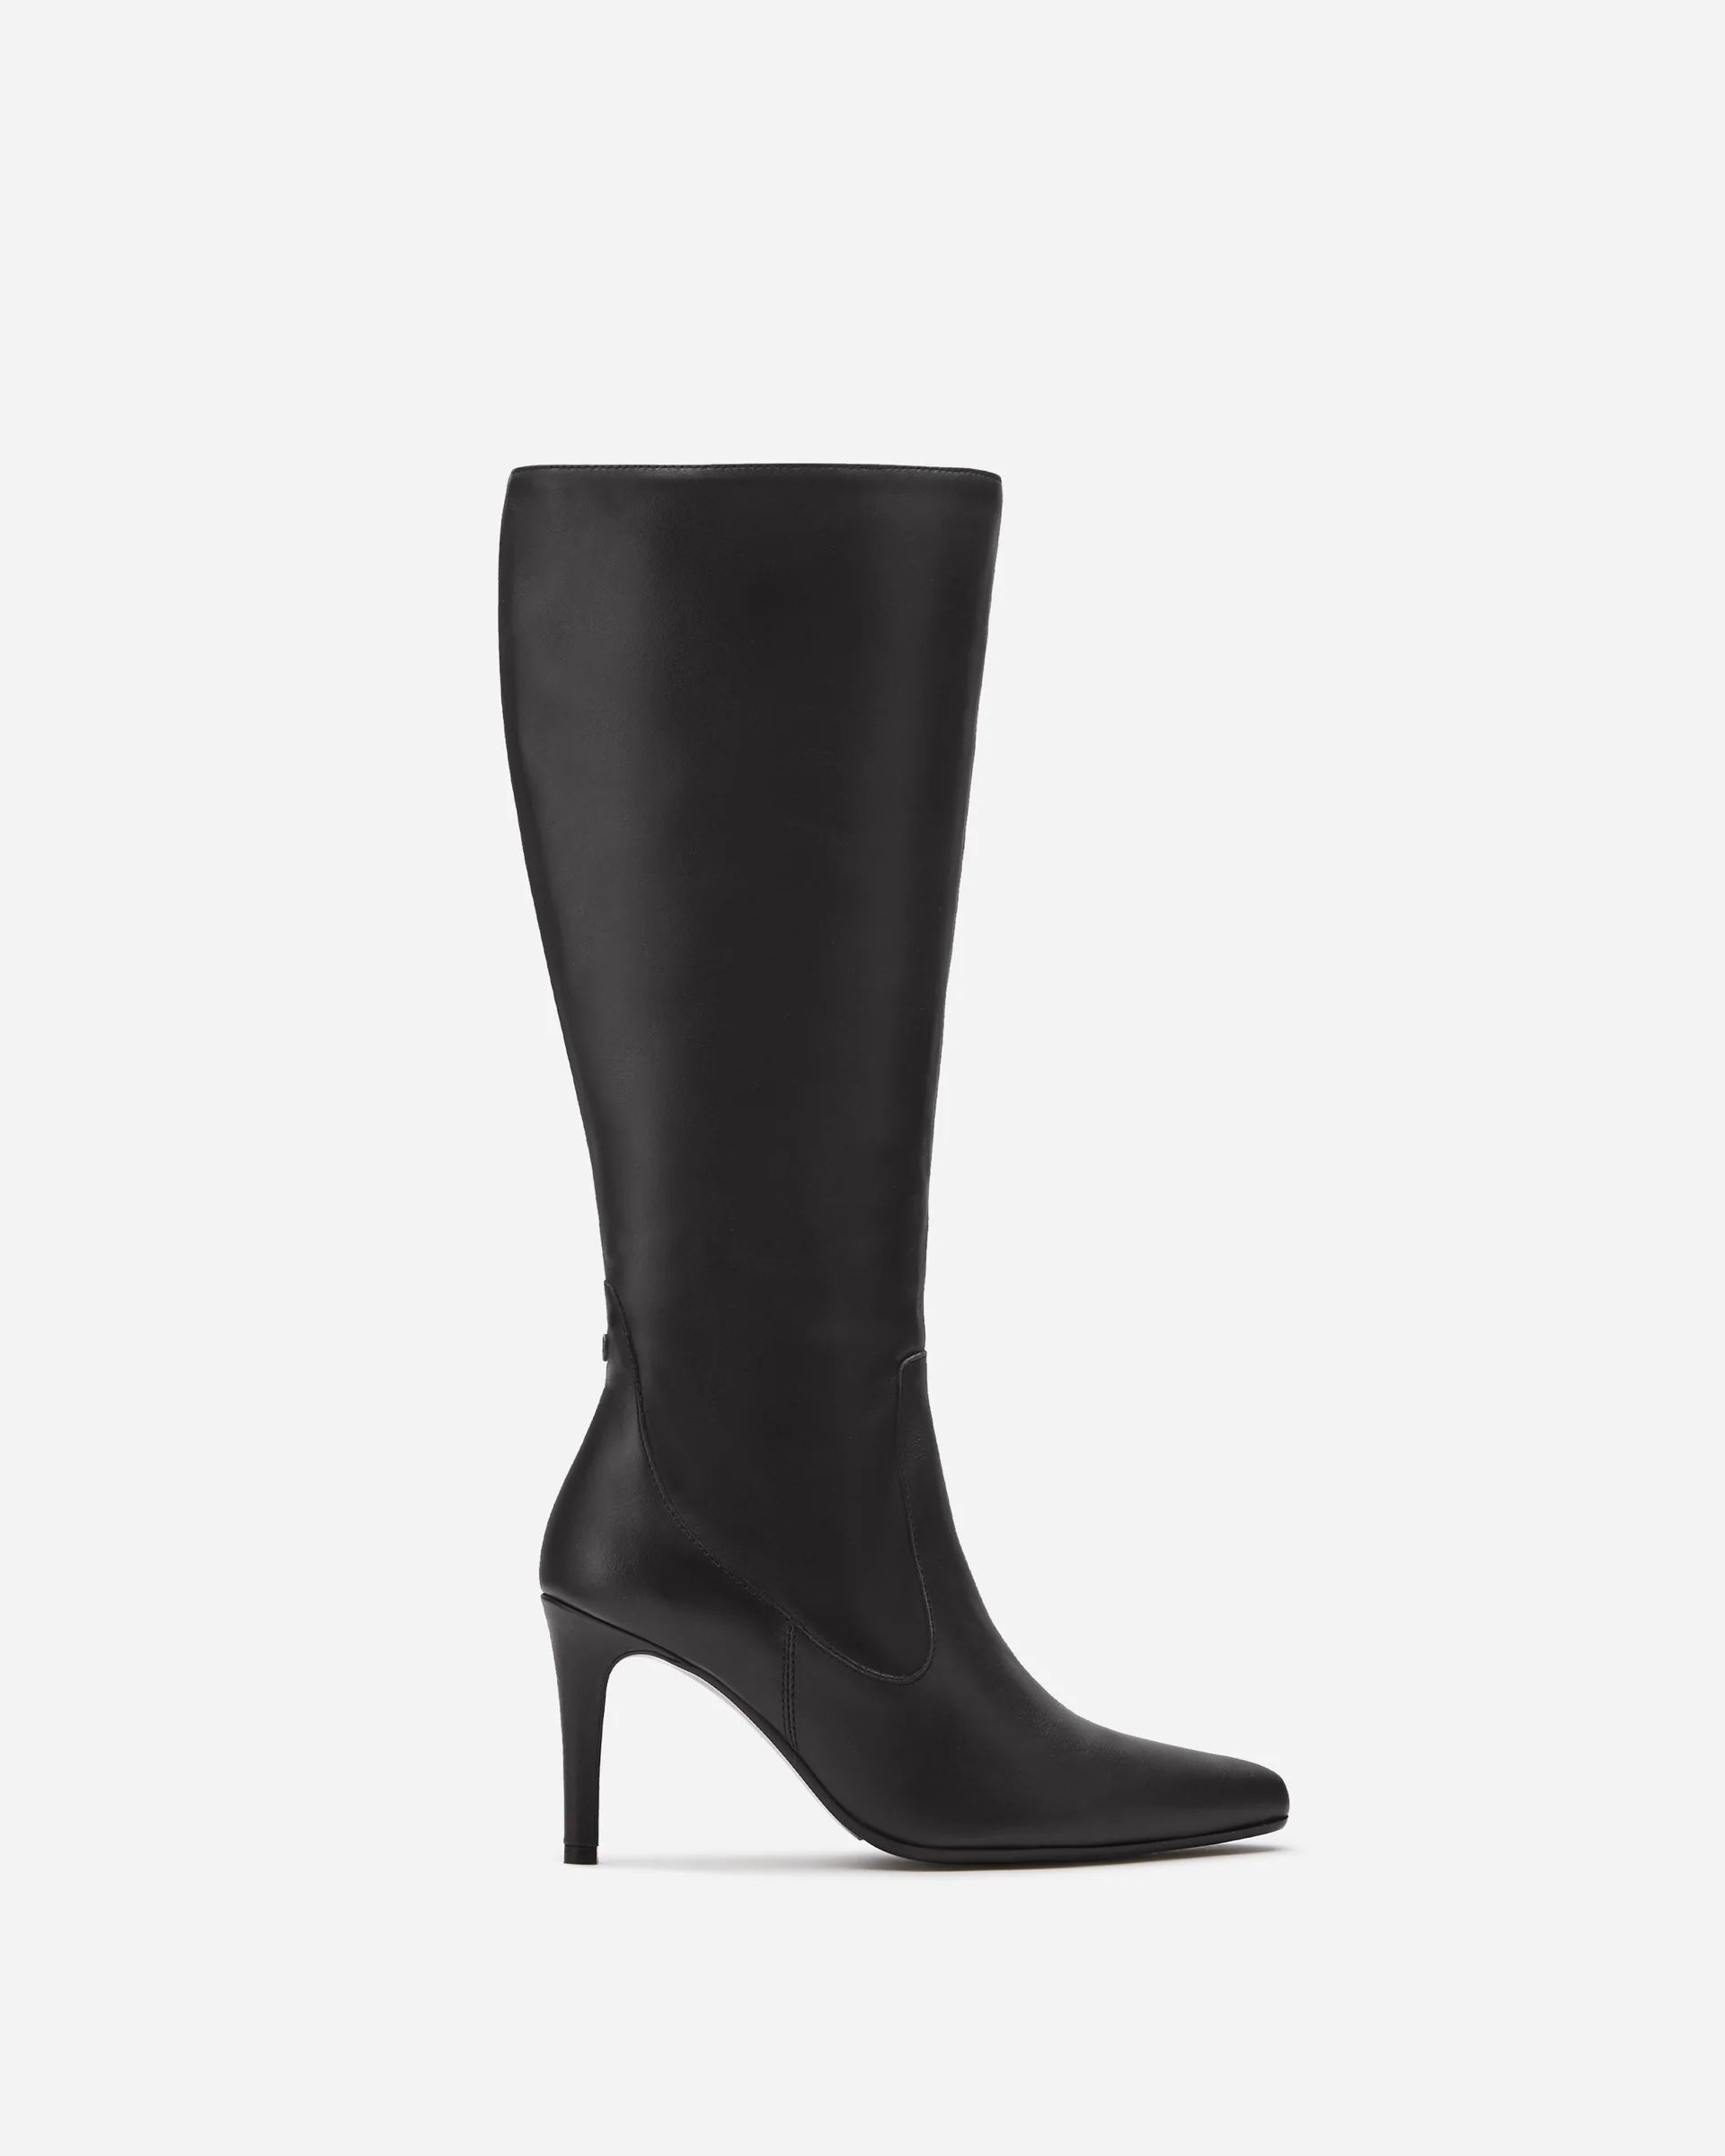 Freya Knee High Boots in Black Leather | DuoBoots